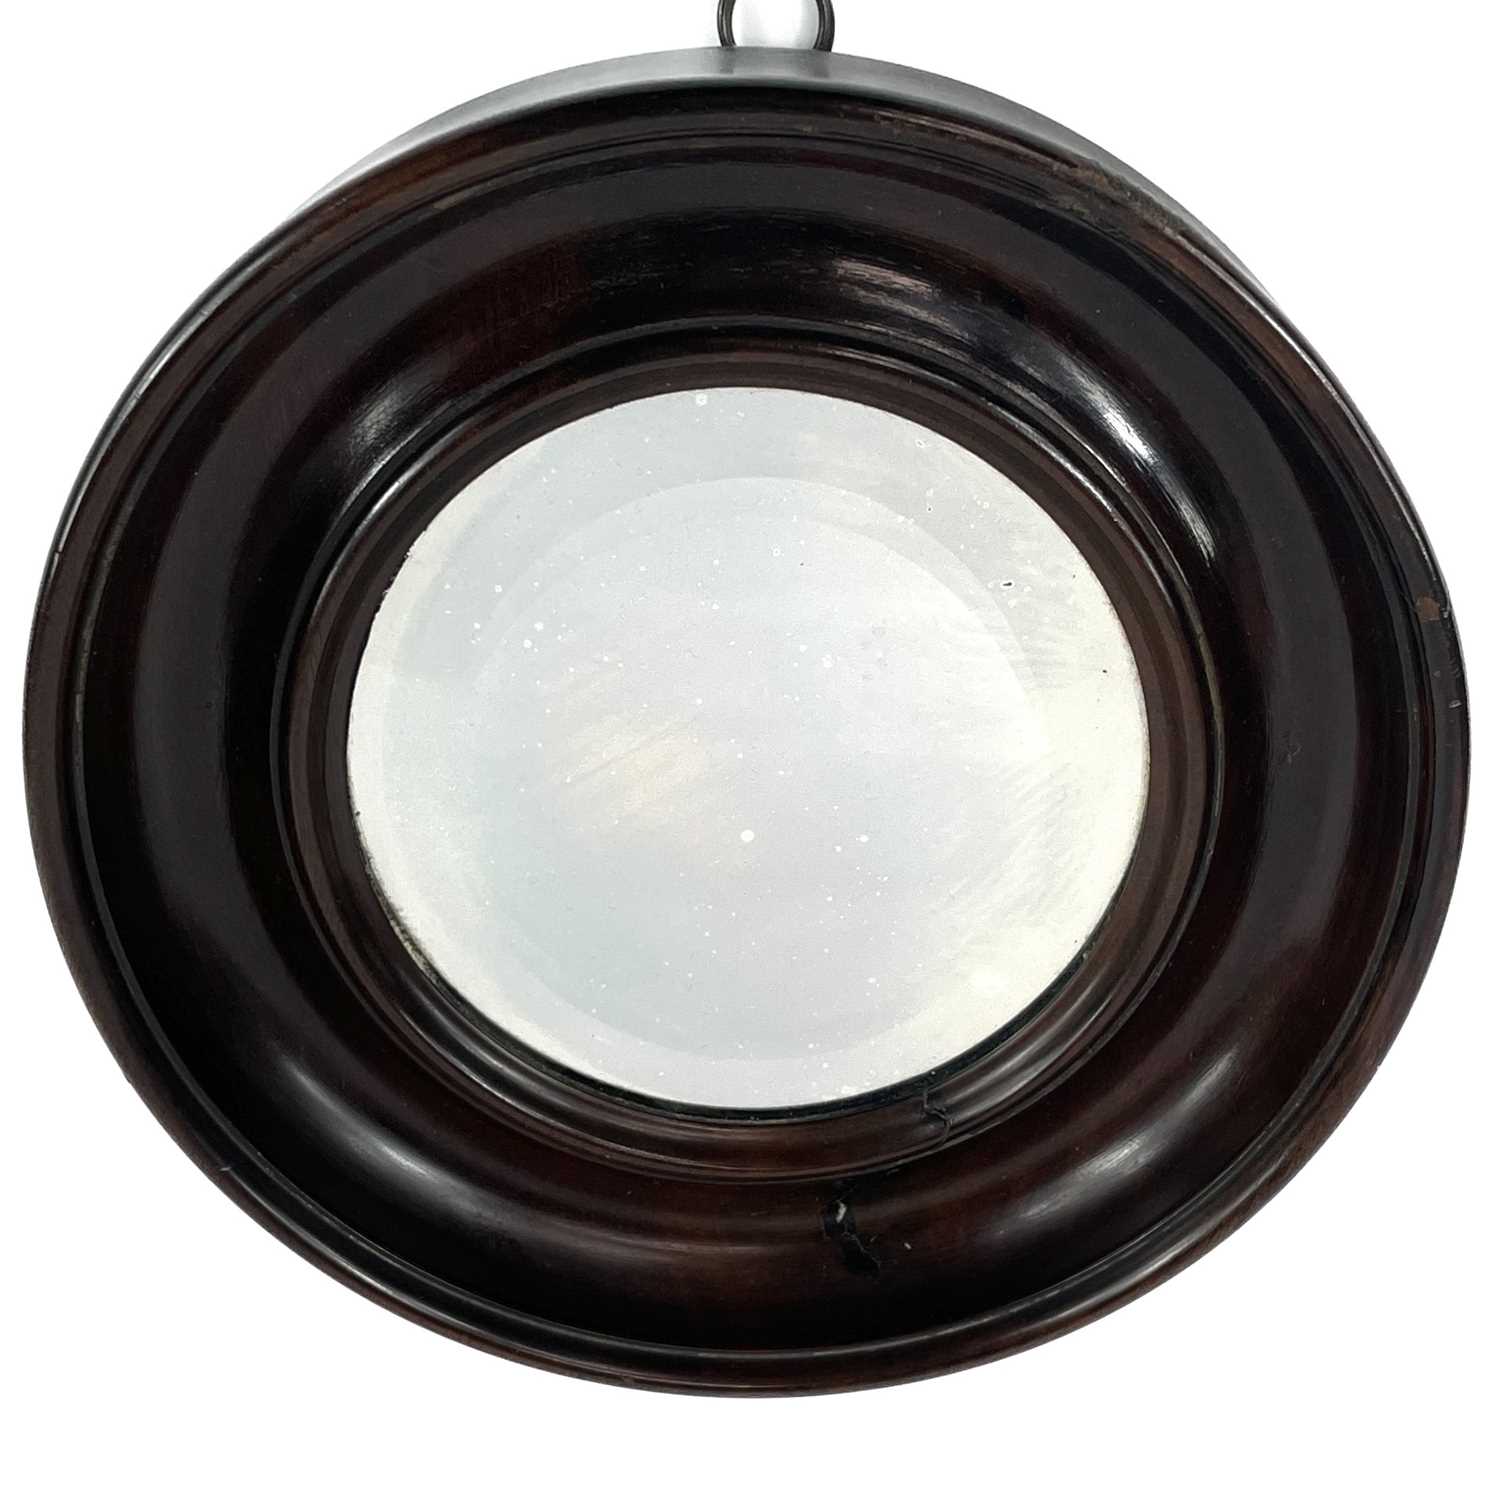 A small late 19th century circular bevelled edge mirror in a mahogany frame.